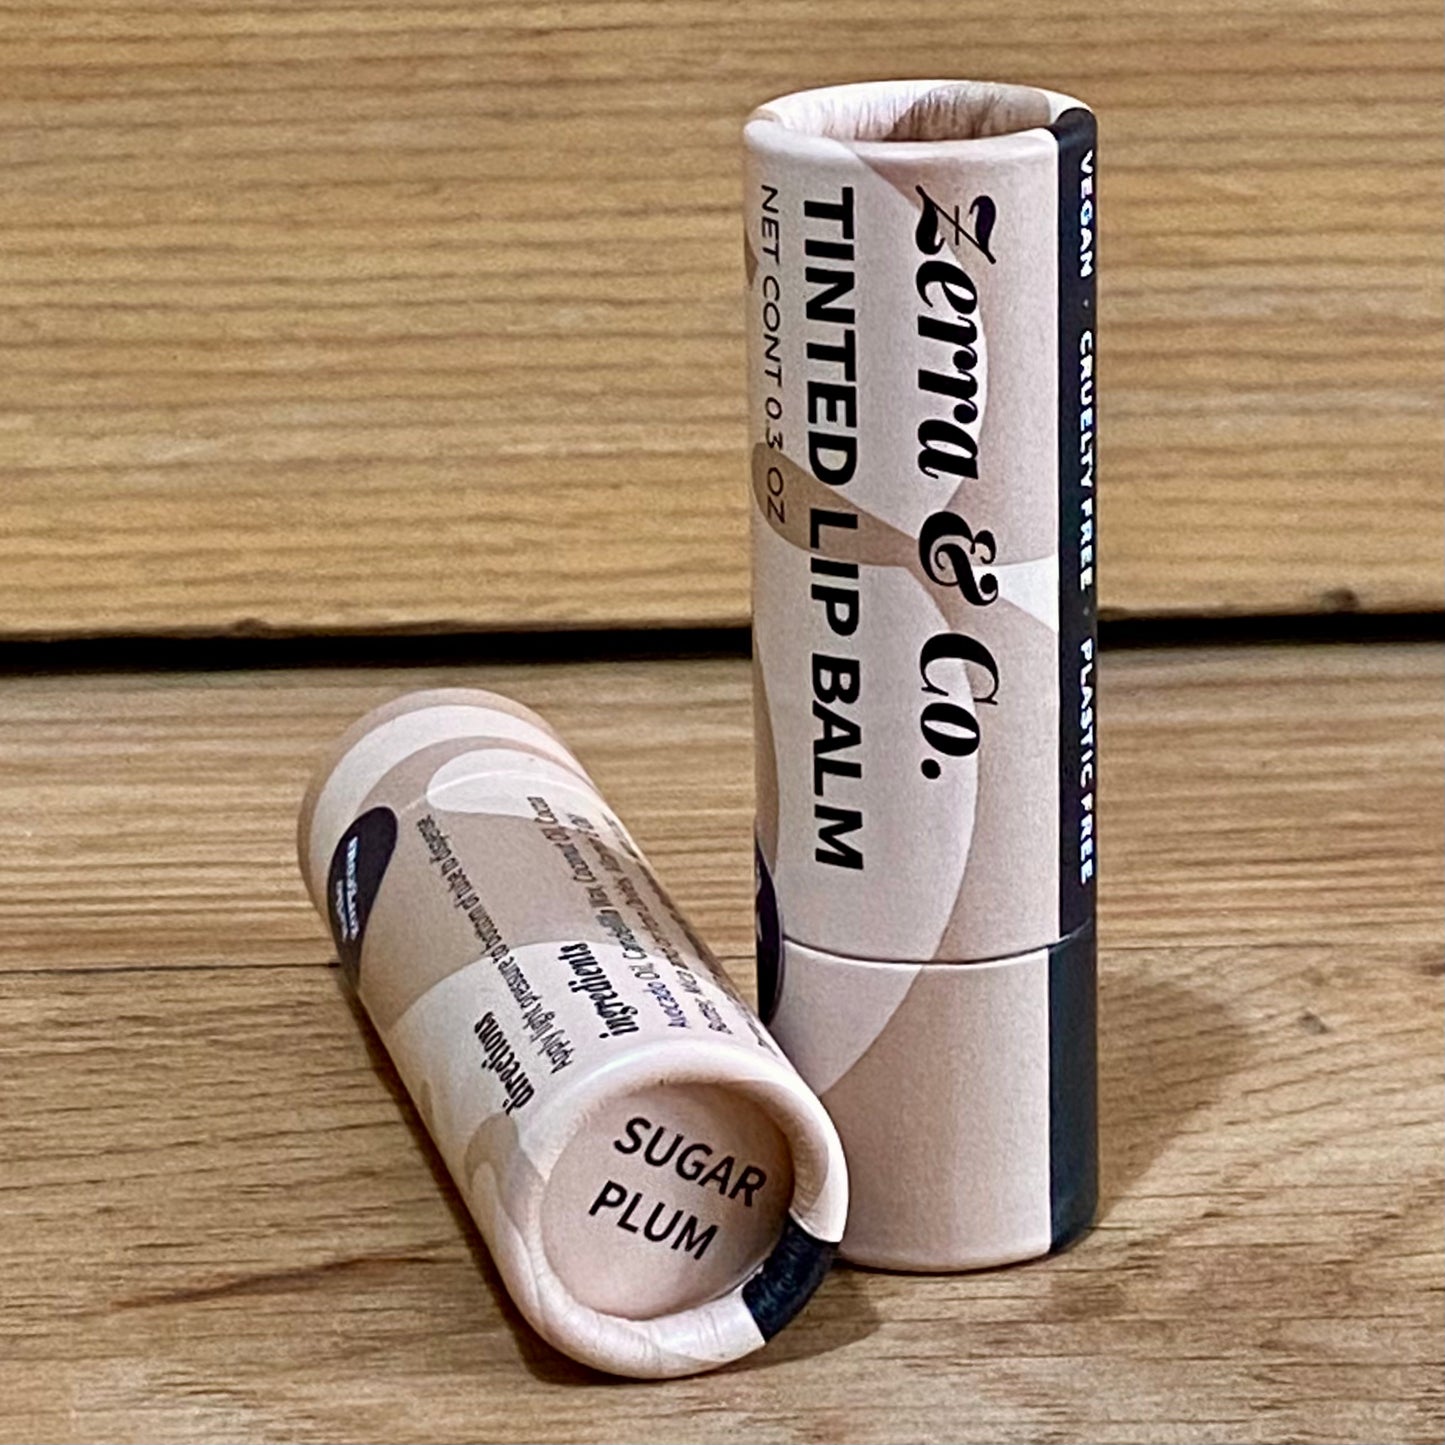 Tinted Lip Balm by Zerra & Co